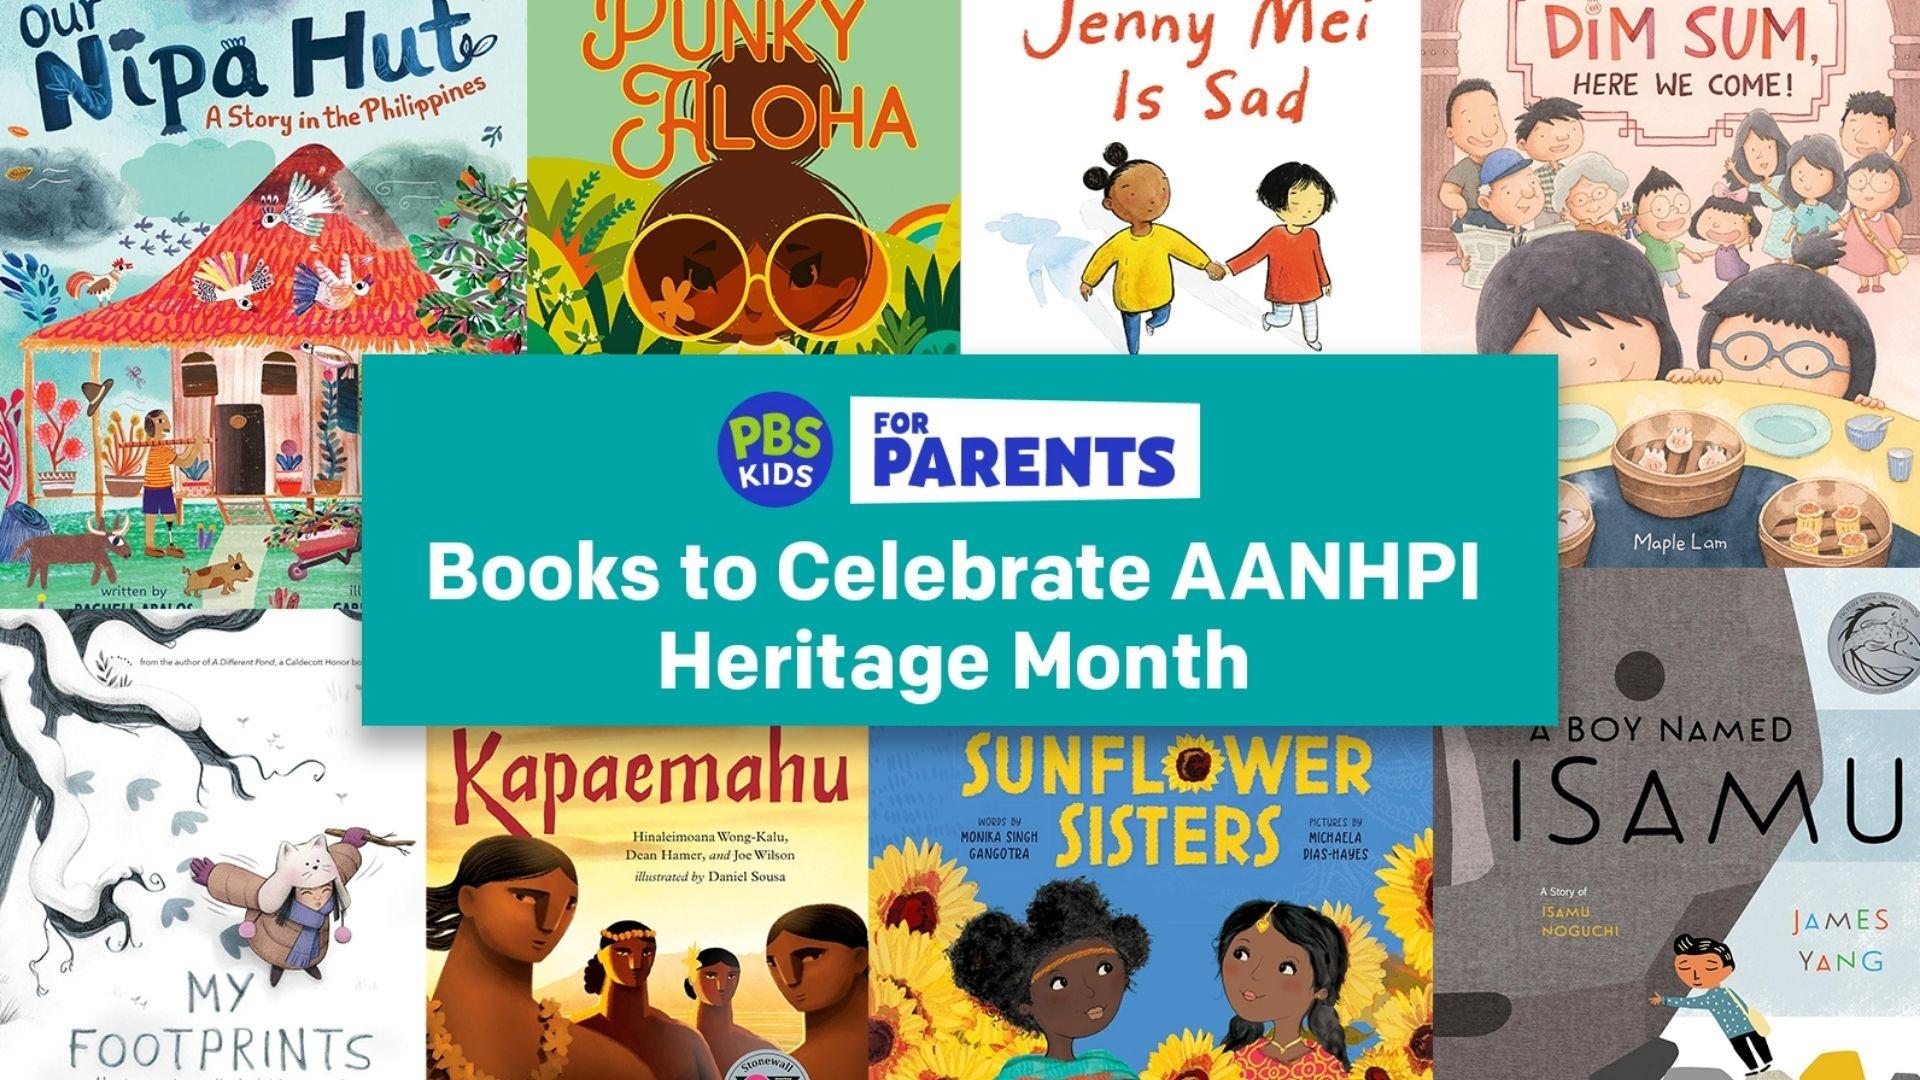 Books to celebrate AANHPI Heritage Month.